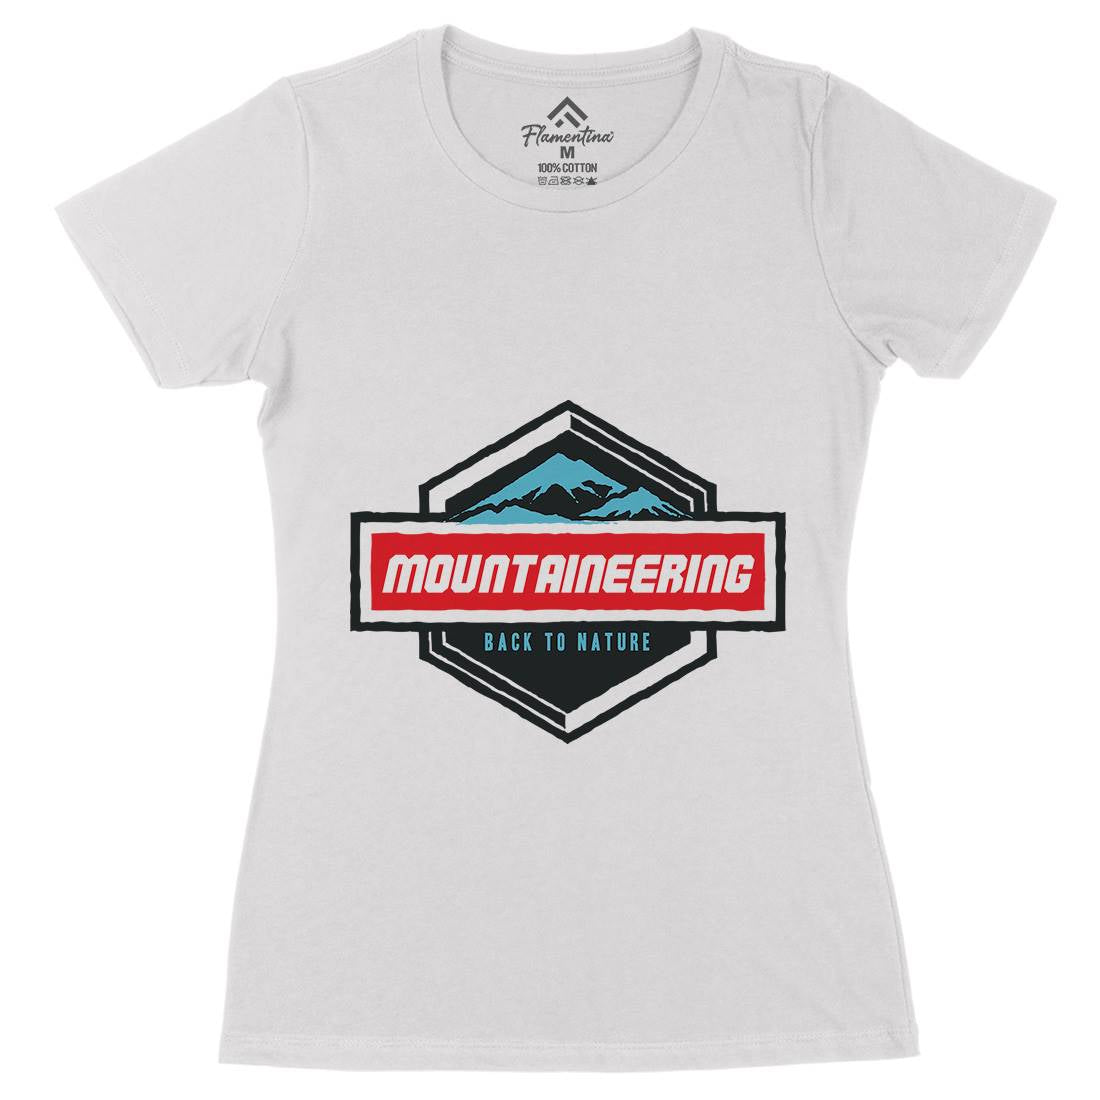 Mountaineering Womens Organic Crew Neck T-Shirt Nature A350